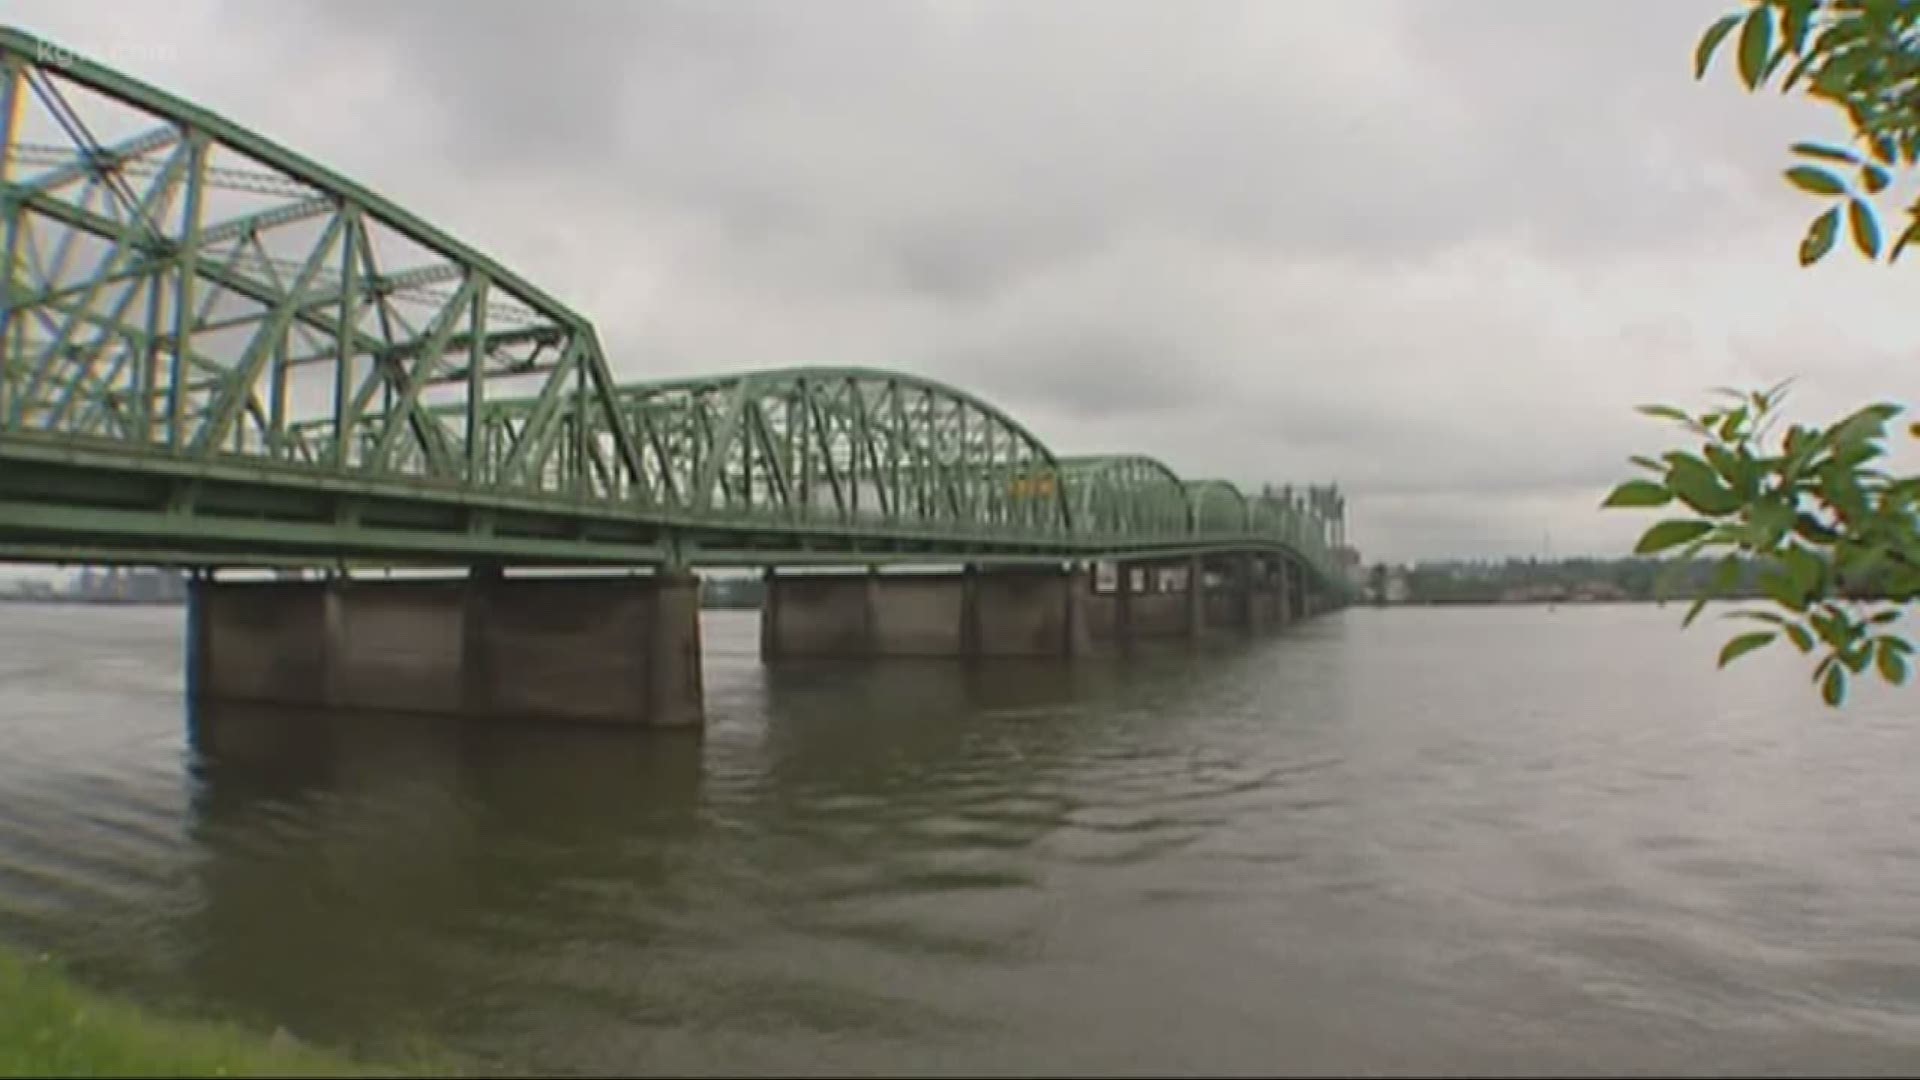 The latest on the effort to build a new I-5 bridge.